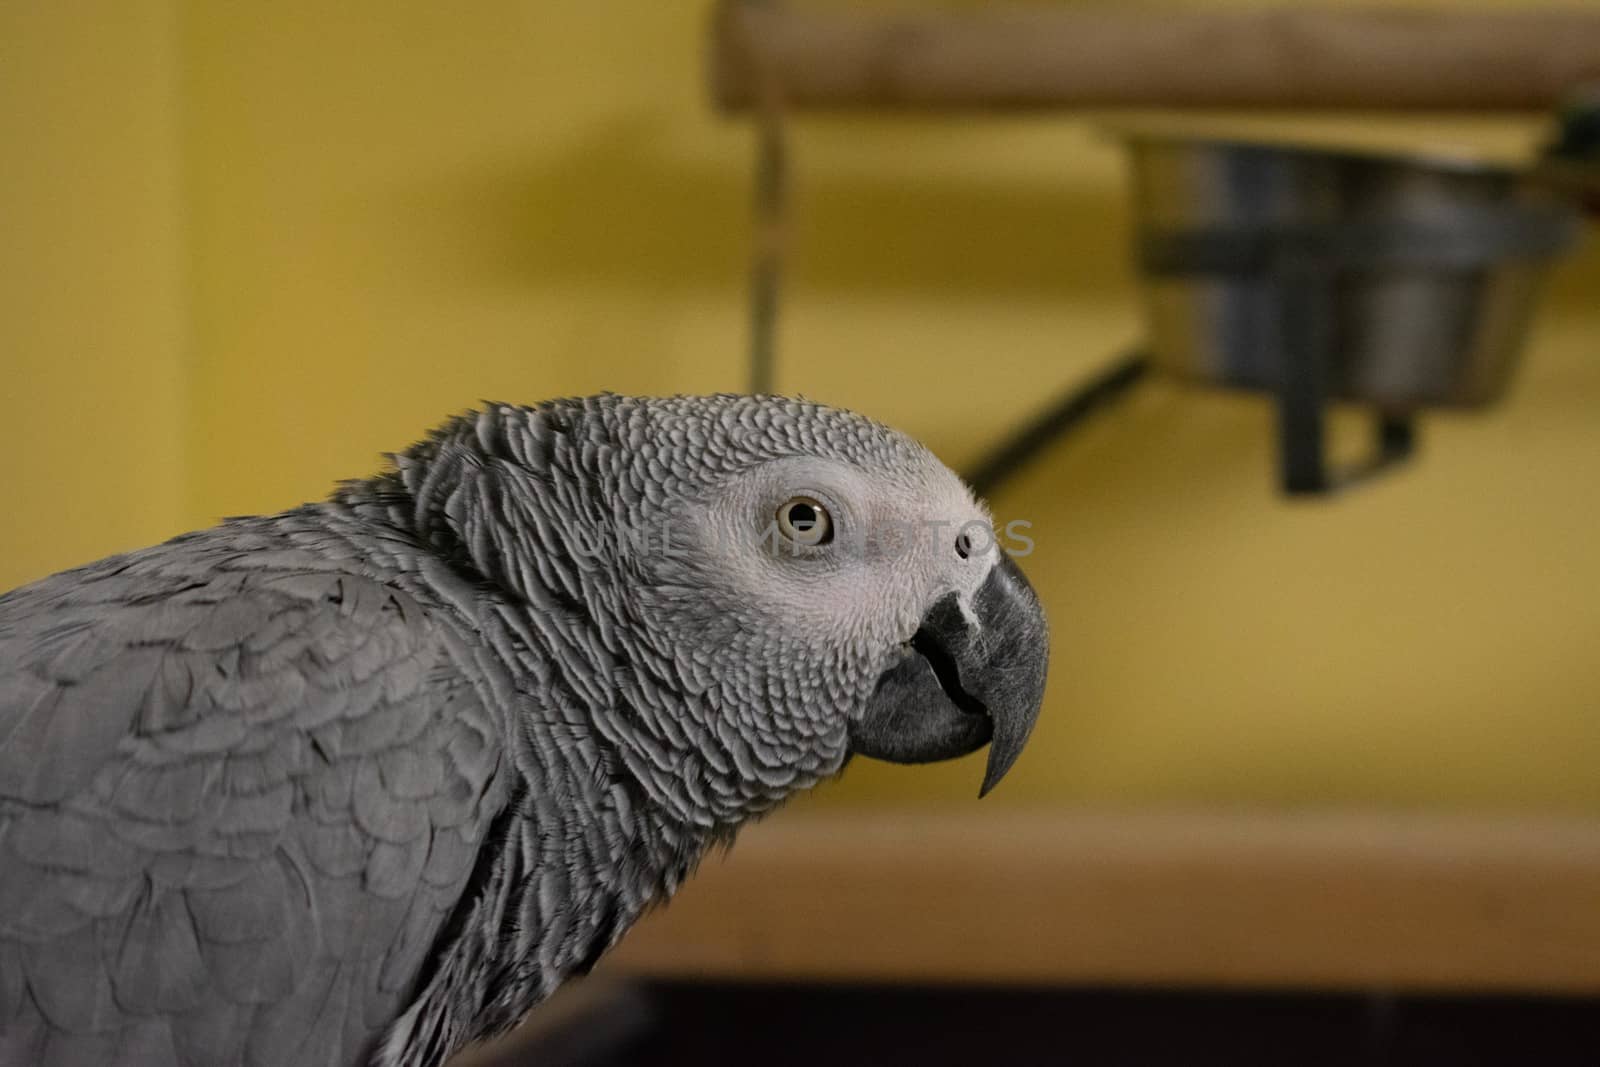 An African Gray Parrot Looking at the Camera With a Yellow Wall  by bju12290